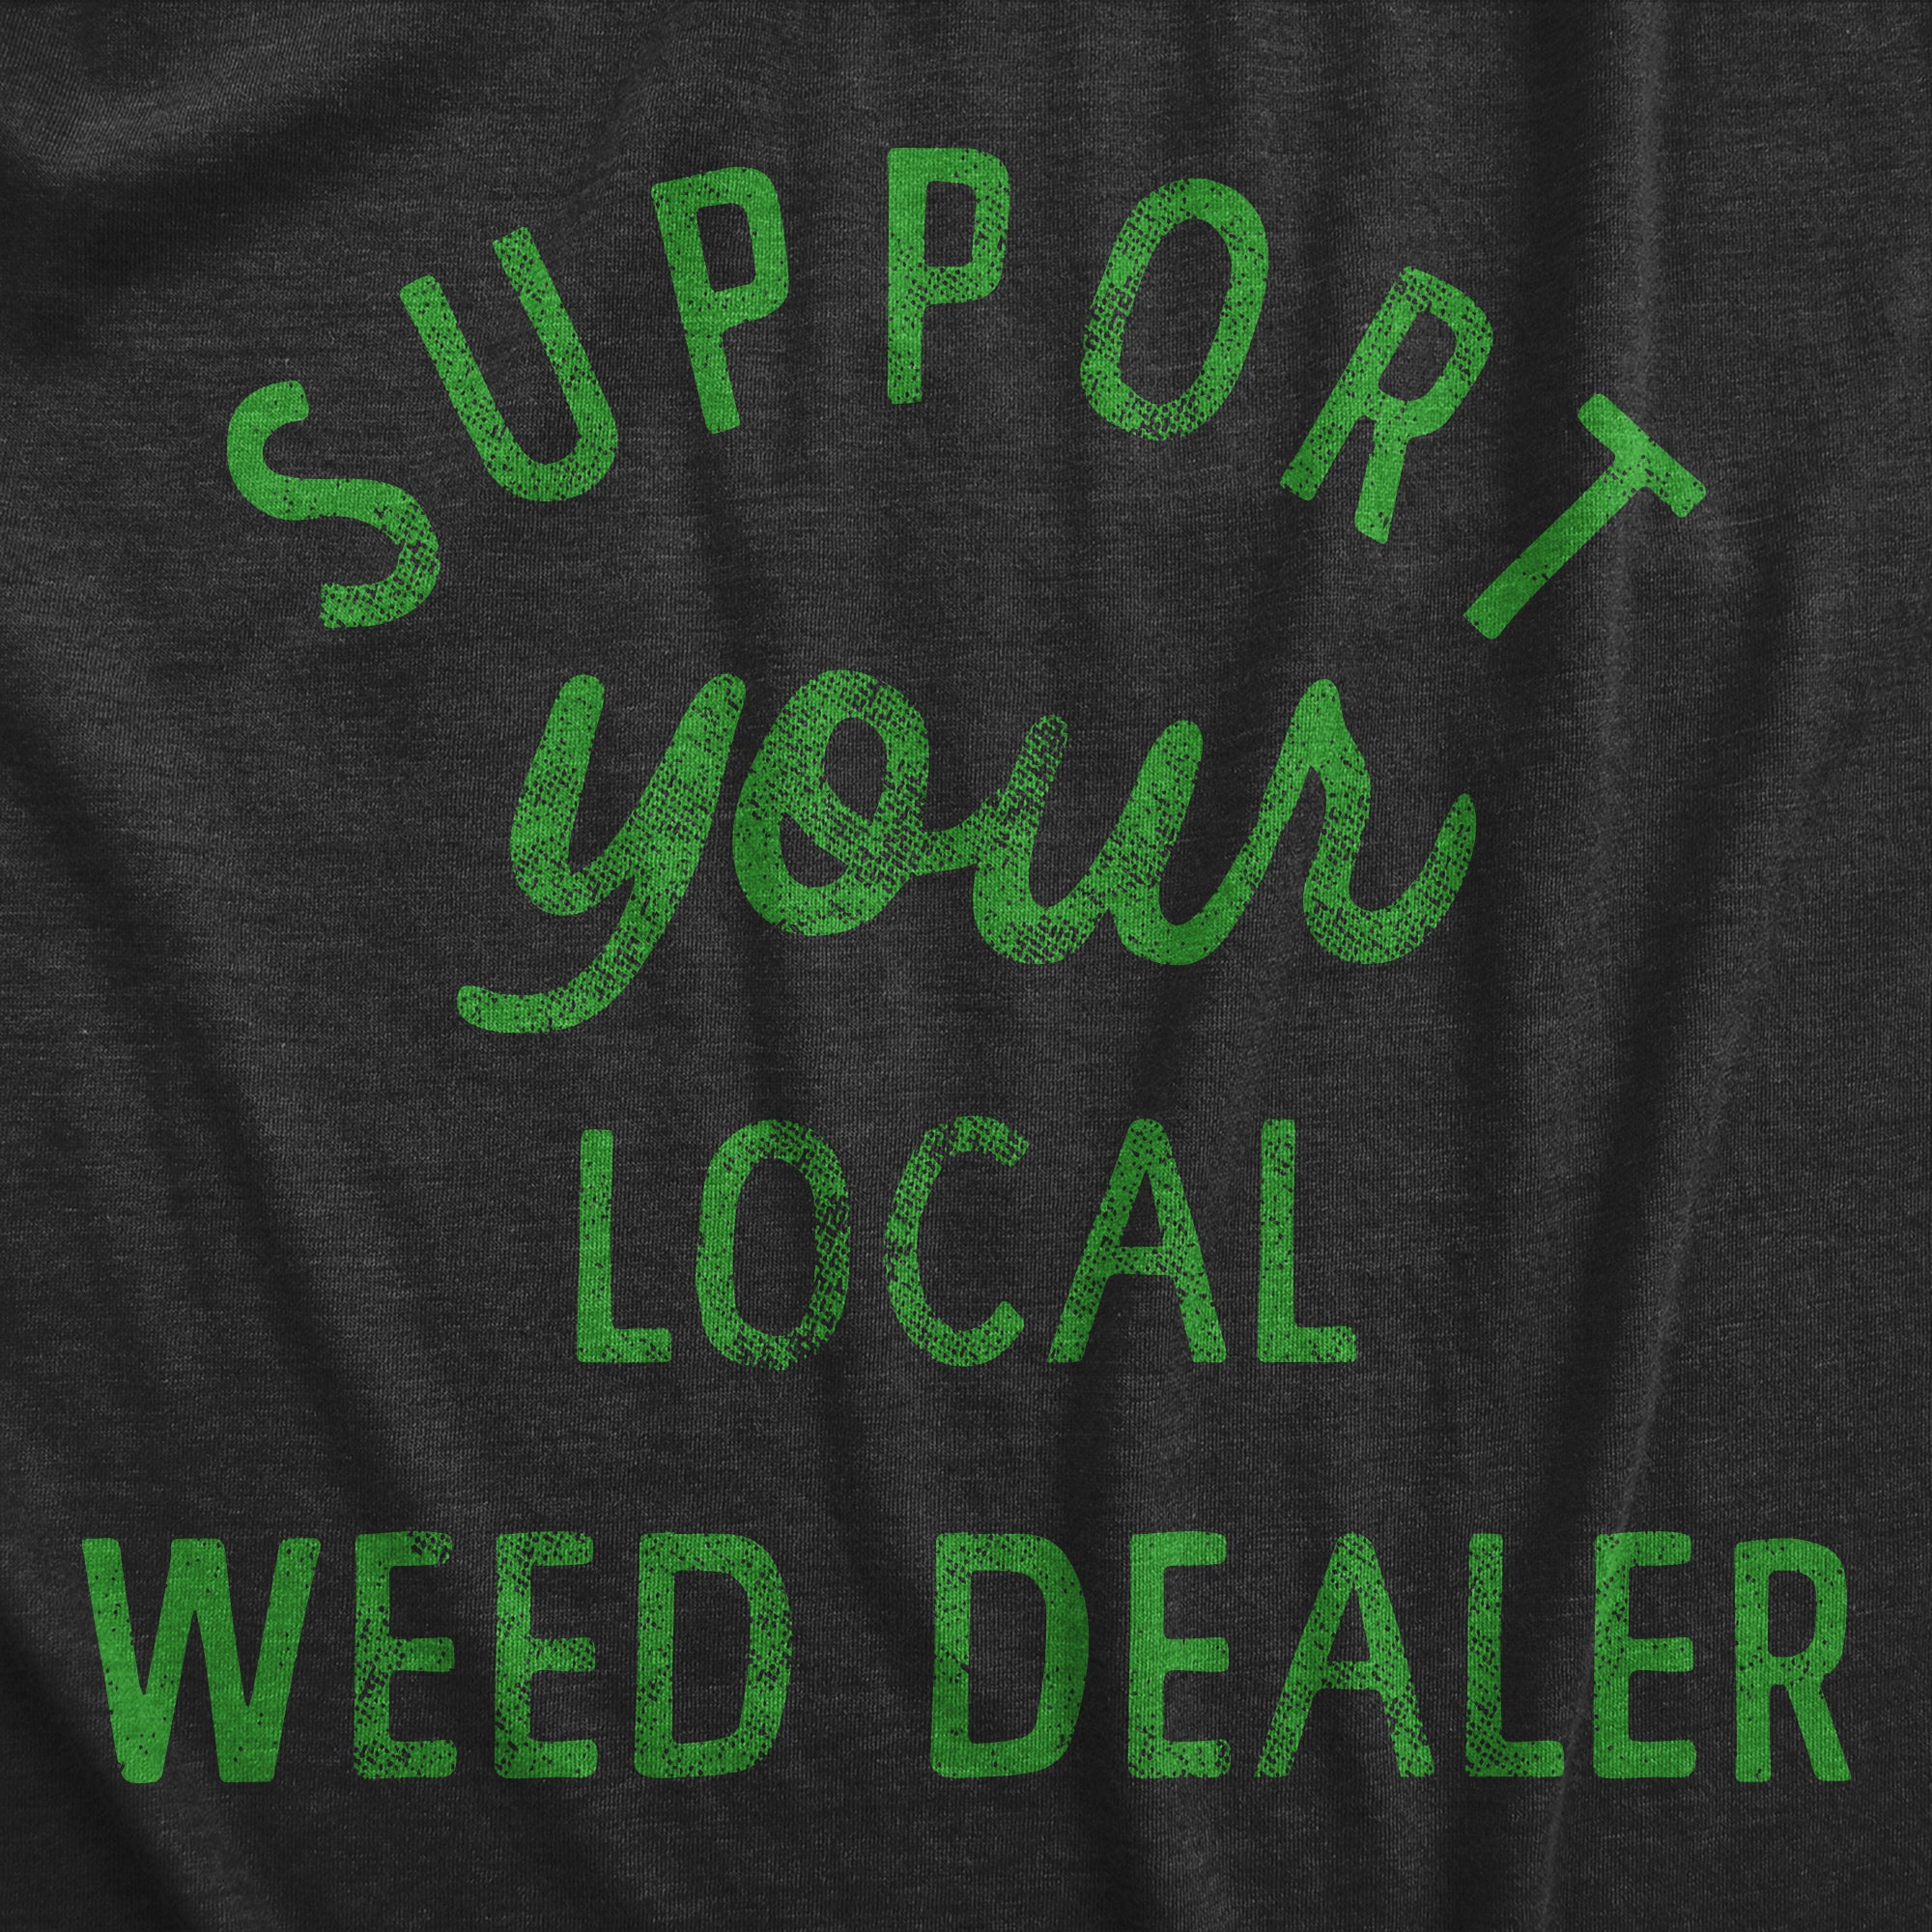 Funny Heather Black - Support Local Support Your Local Weed Dealer Mens T Shirt Nerdy 420 Sarcastic Tee